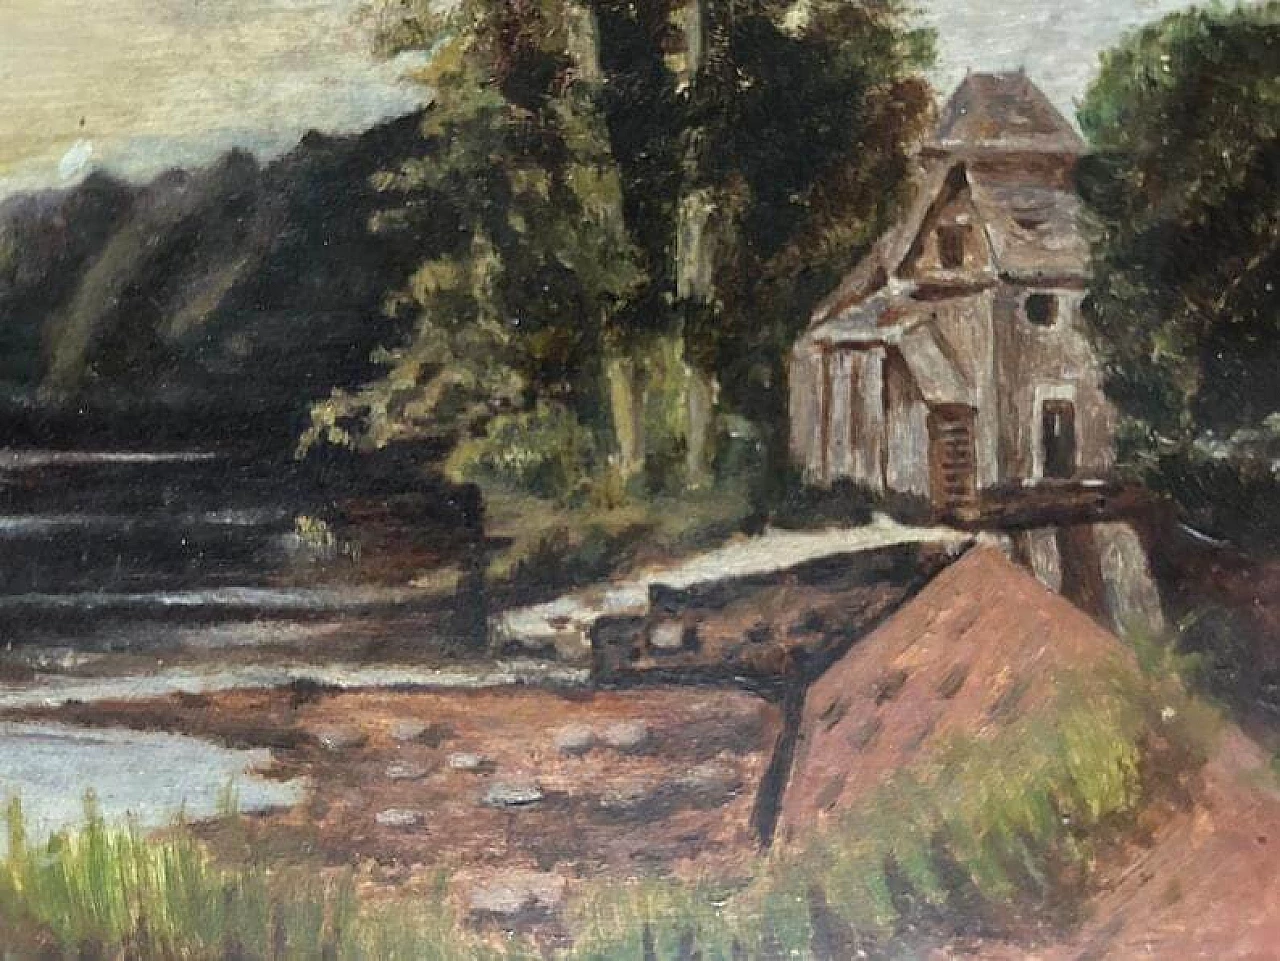 Lake landscape in the style of the Barbizon School, painting, 1920s 10